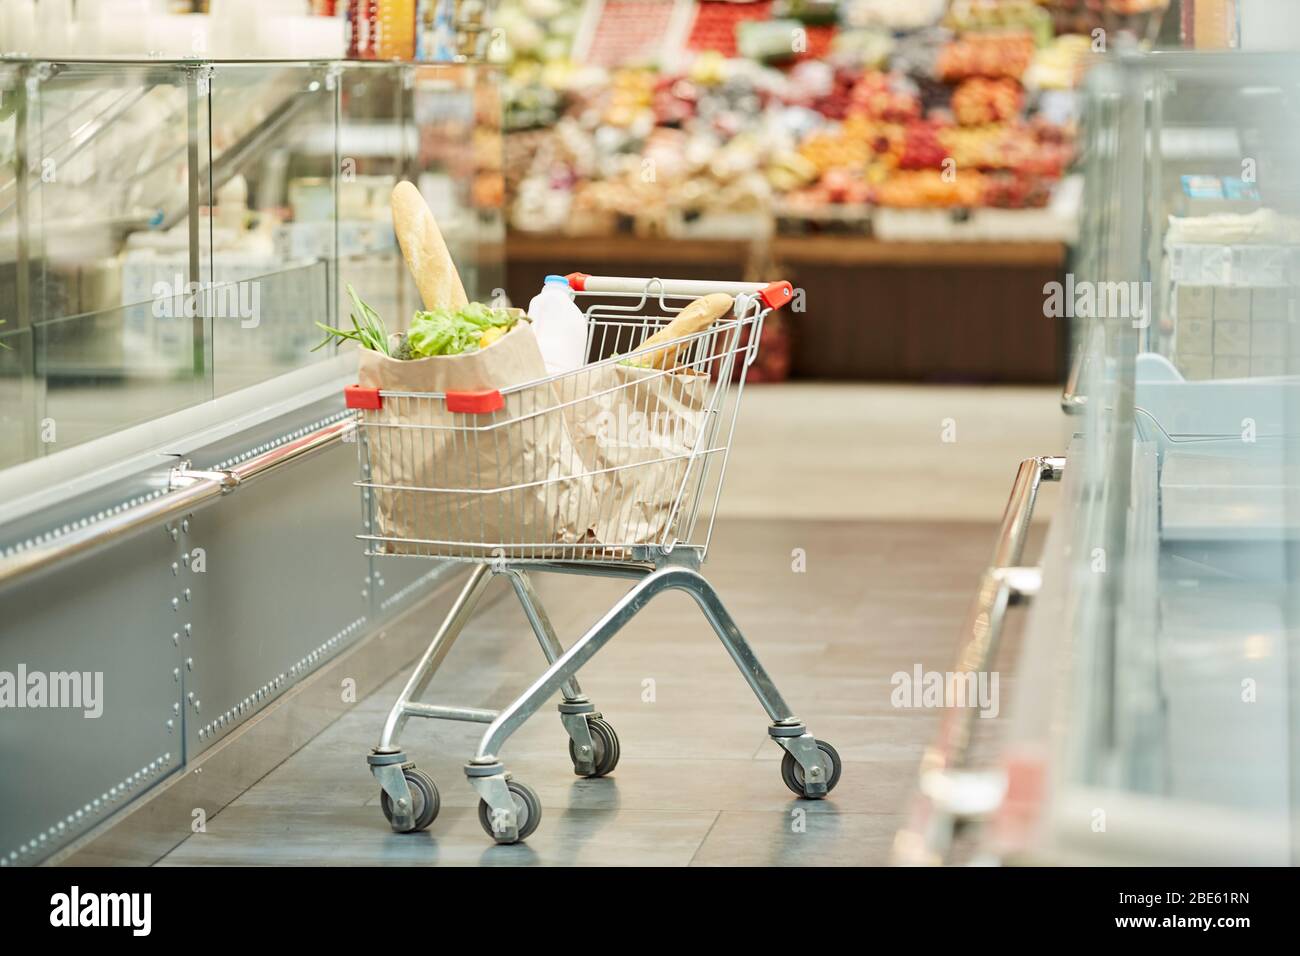 Full length background image of shopping cart with groceries standing in supermarket, copy space Stock Photo